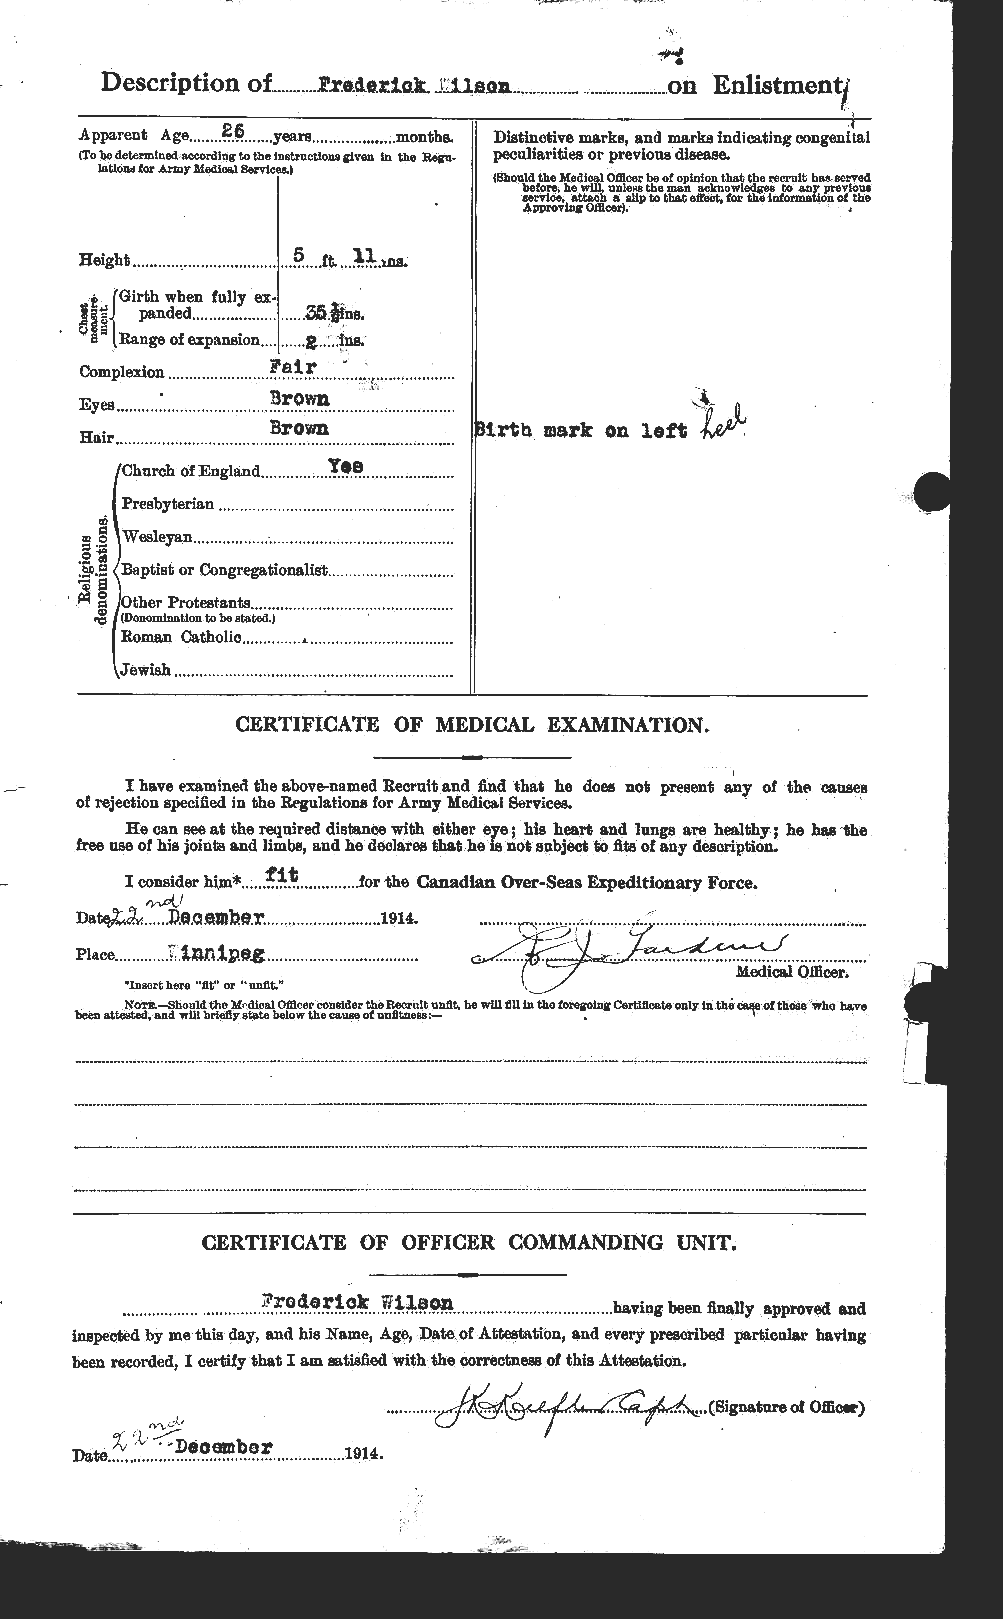 Personnel Records of the First World War - CEF 677576b